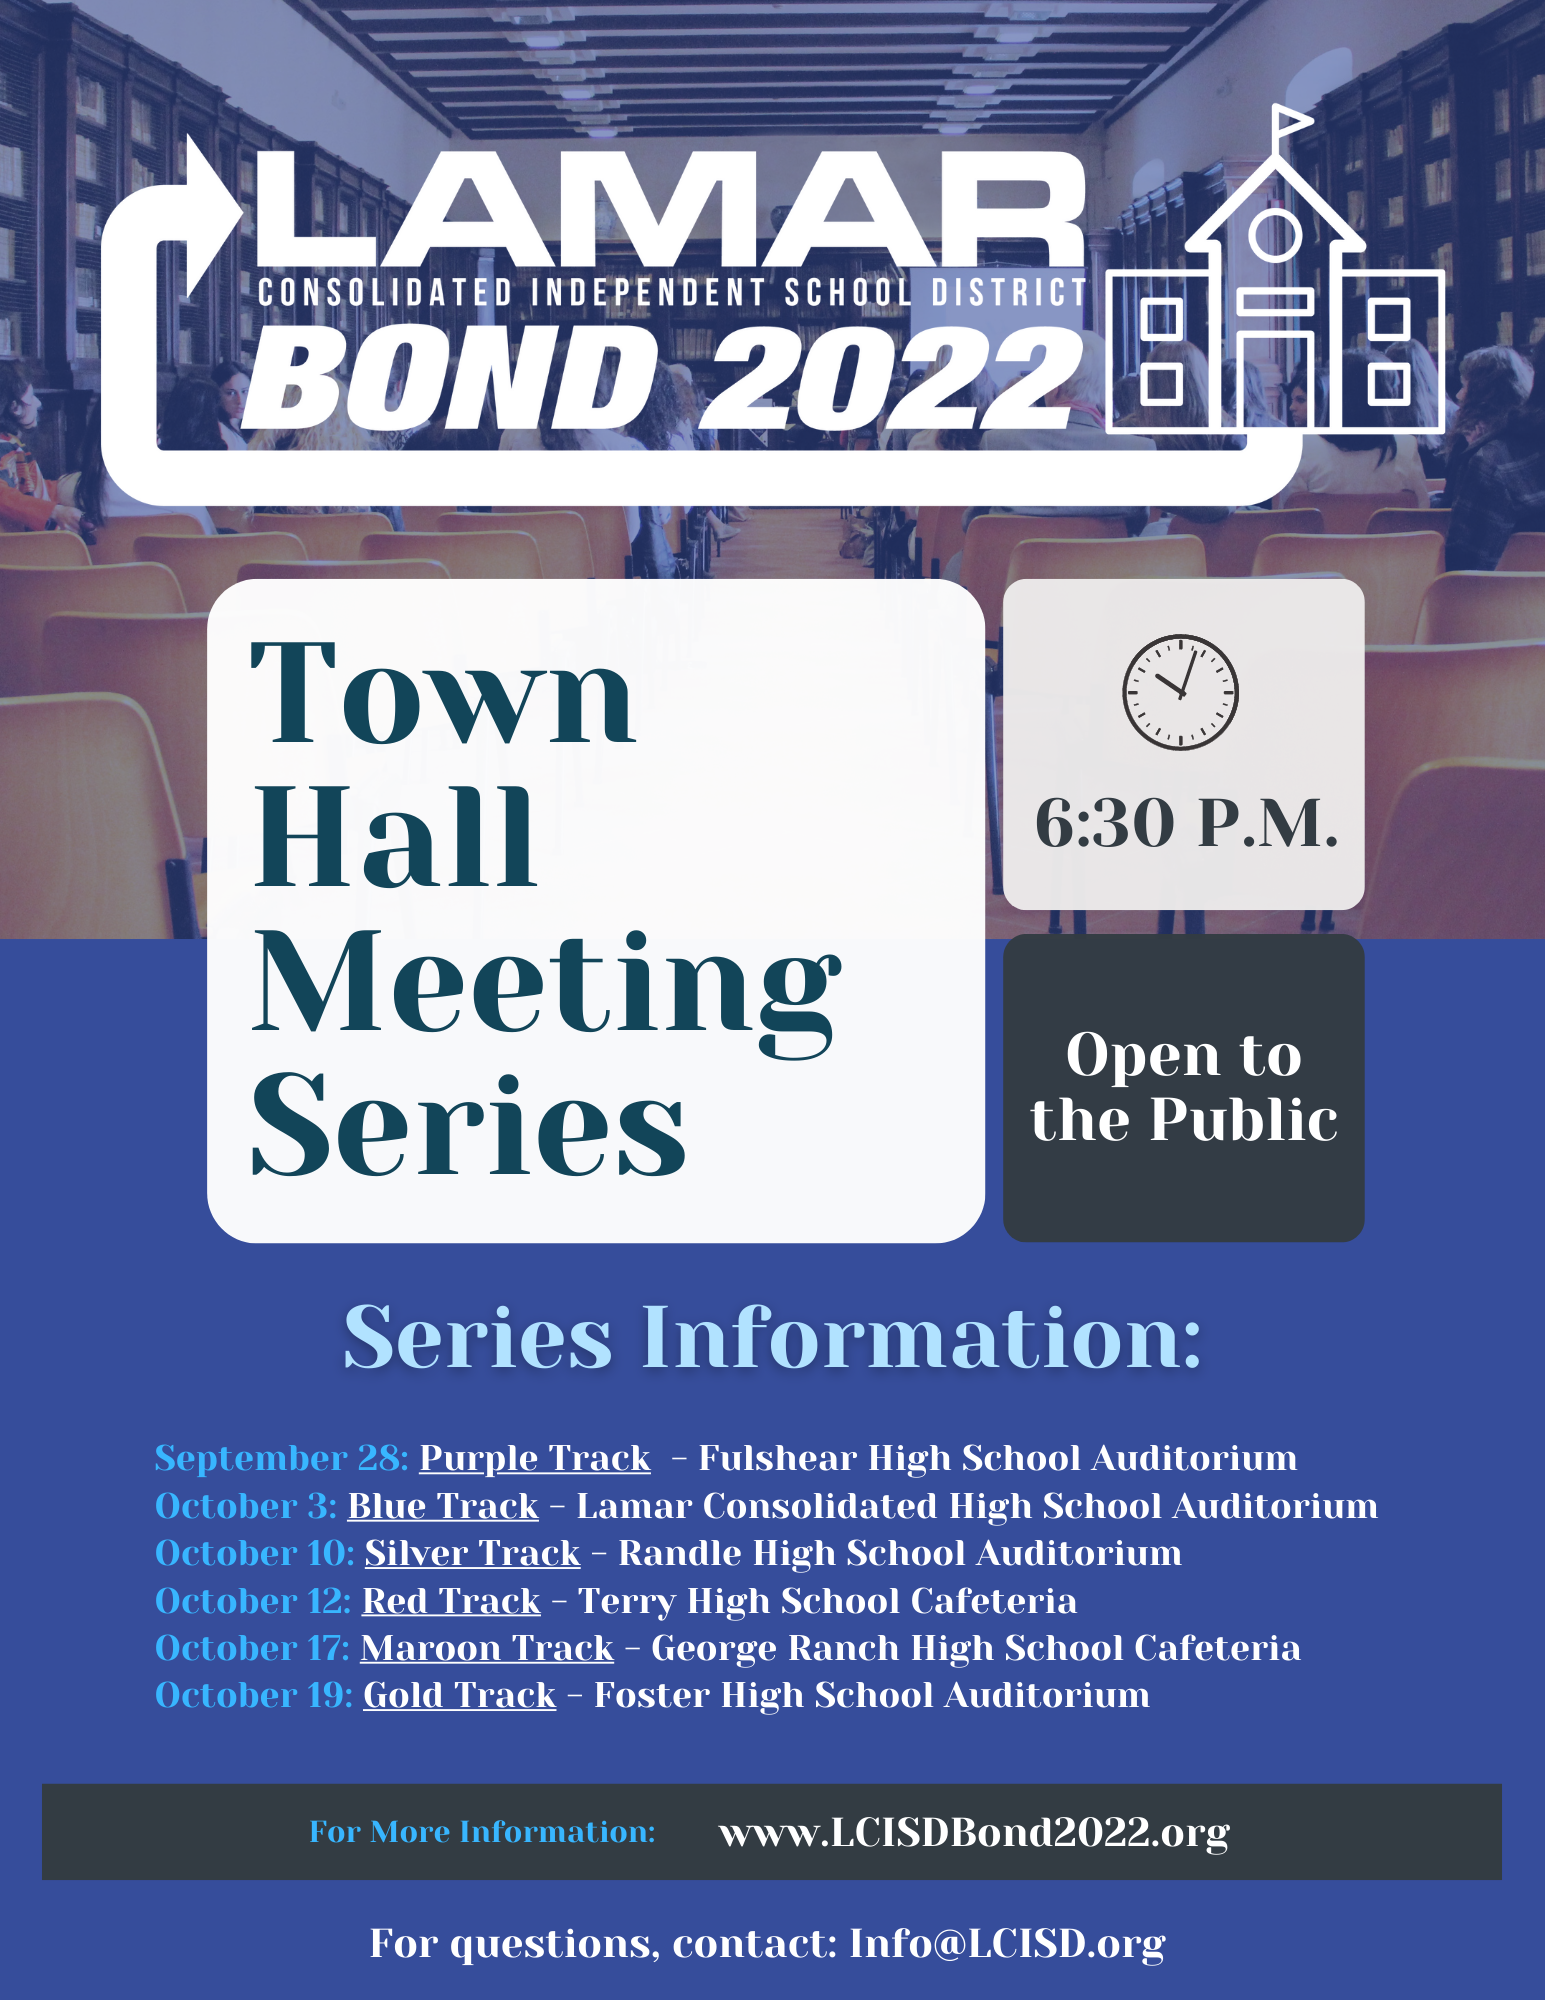 Town Hall Meeting